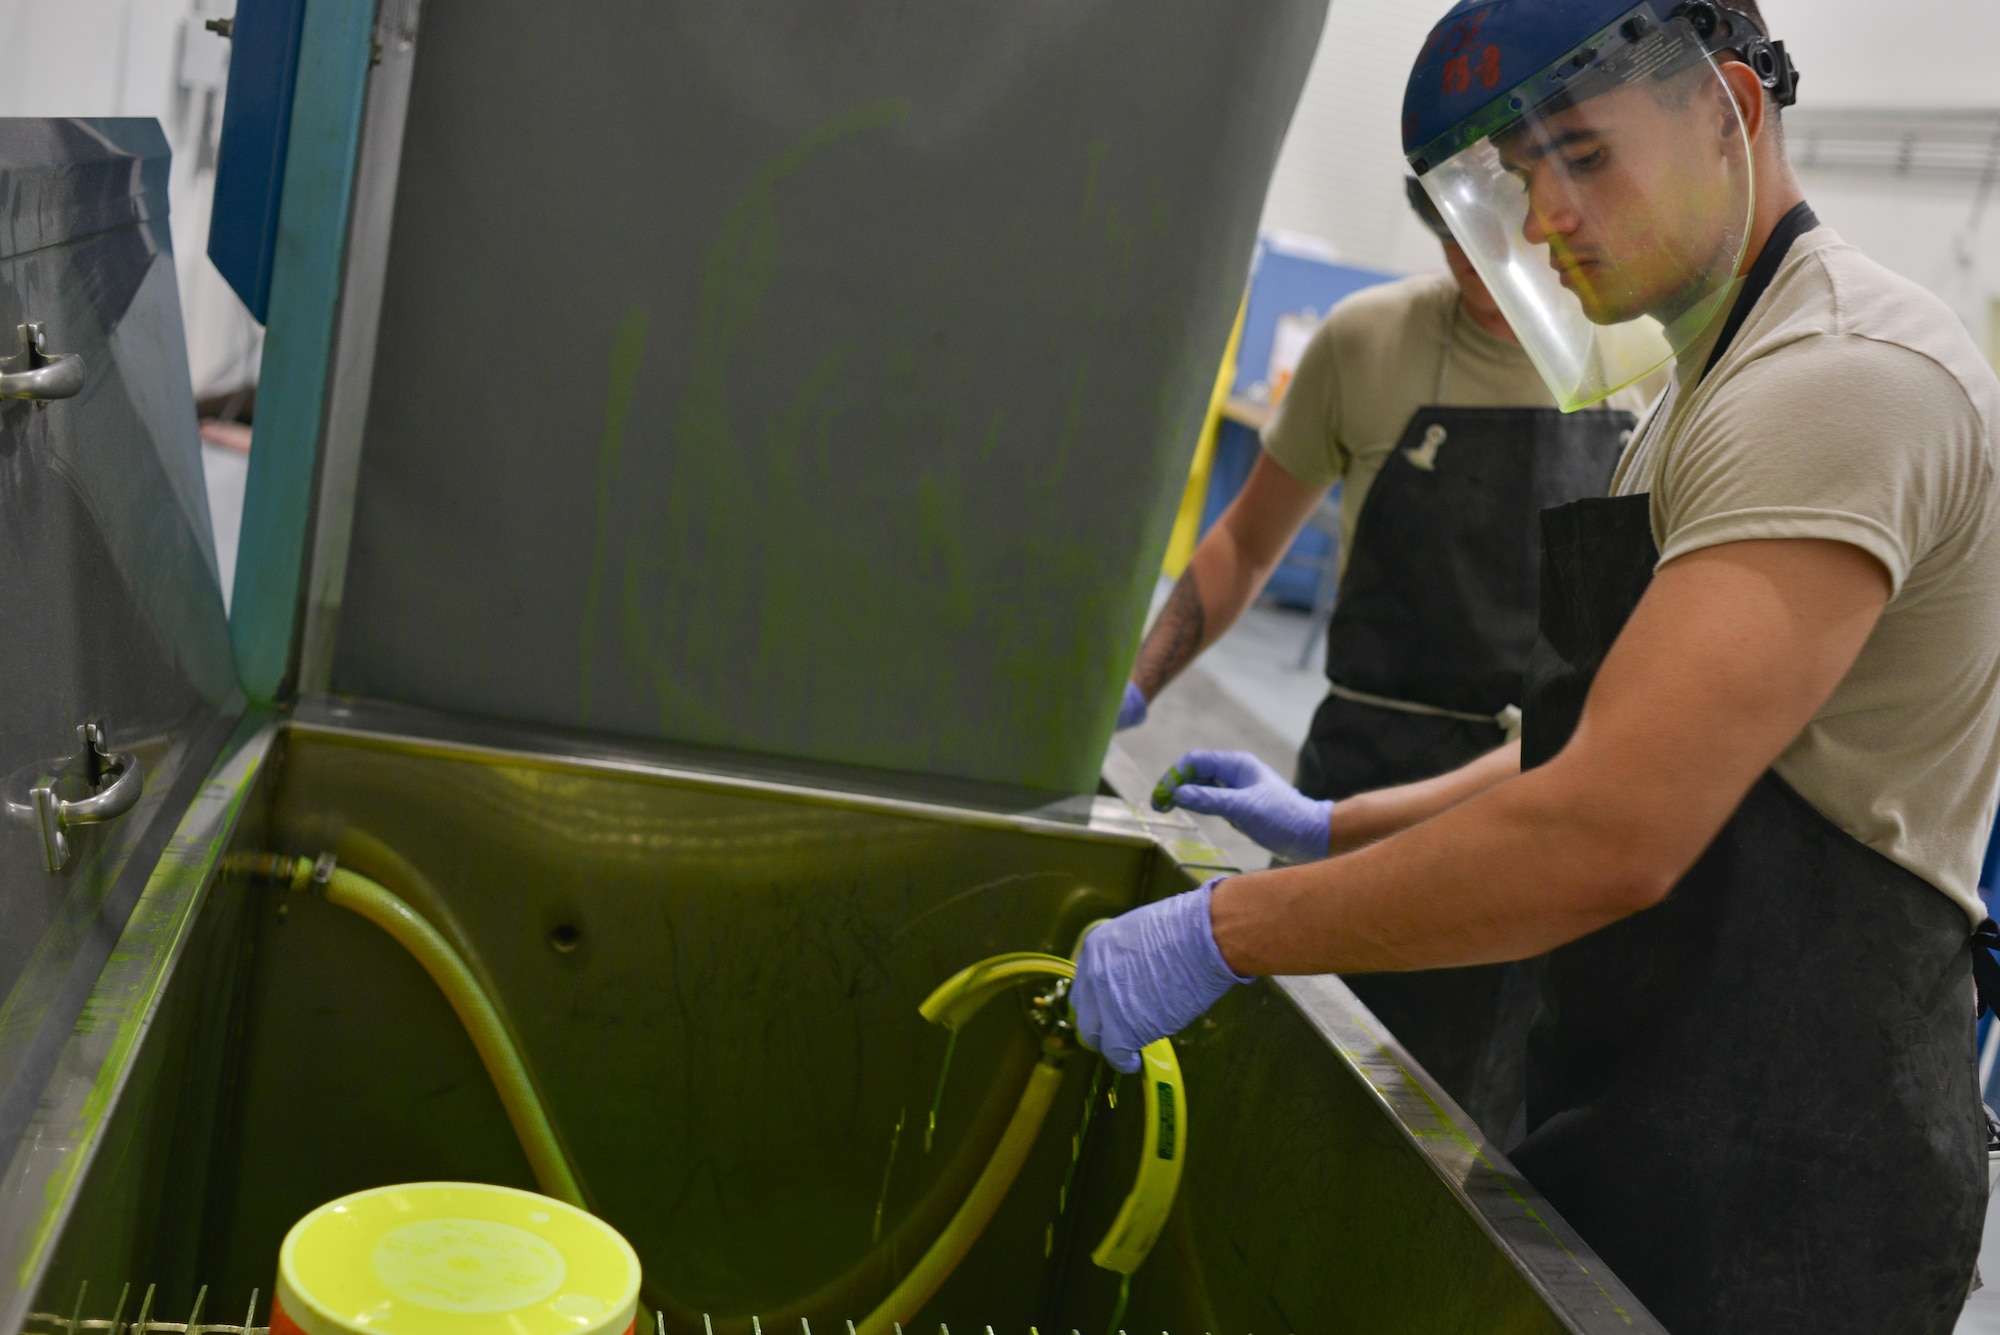 Airman 1st Class Berkeley Lopez, 379th Expeditionary Maintenance Squadron Nondestructive Inspection laboratory, coats an F-16 Fighting Falcon brake part in fluorescent liquid penetrant August 12, 2015 at Al Udeid Air Base, Qatar. NDI Airmen inspect for cracks and flaws on aircraft and their components, aerospace ground equipment and safety equipment.  They also test jet engine oil samples, using a variety of methods, like magnetic particle, fluorescent penetrant, eddy current, radiography, optical and ultrasonic equipment. (U.S. Air Force photo/Staff Sgt. Alexandre Montes)   